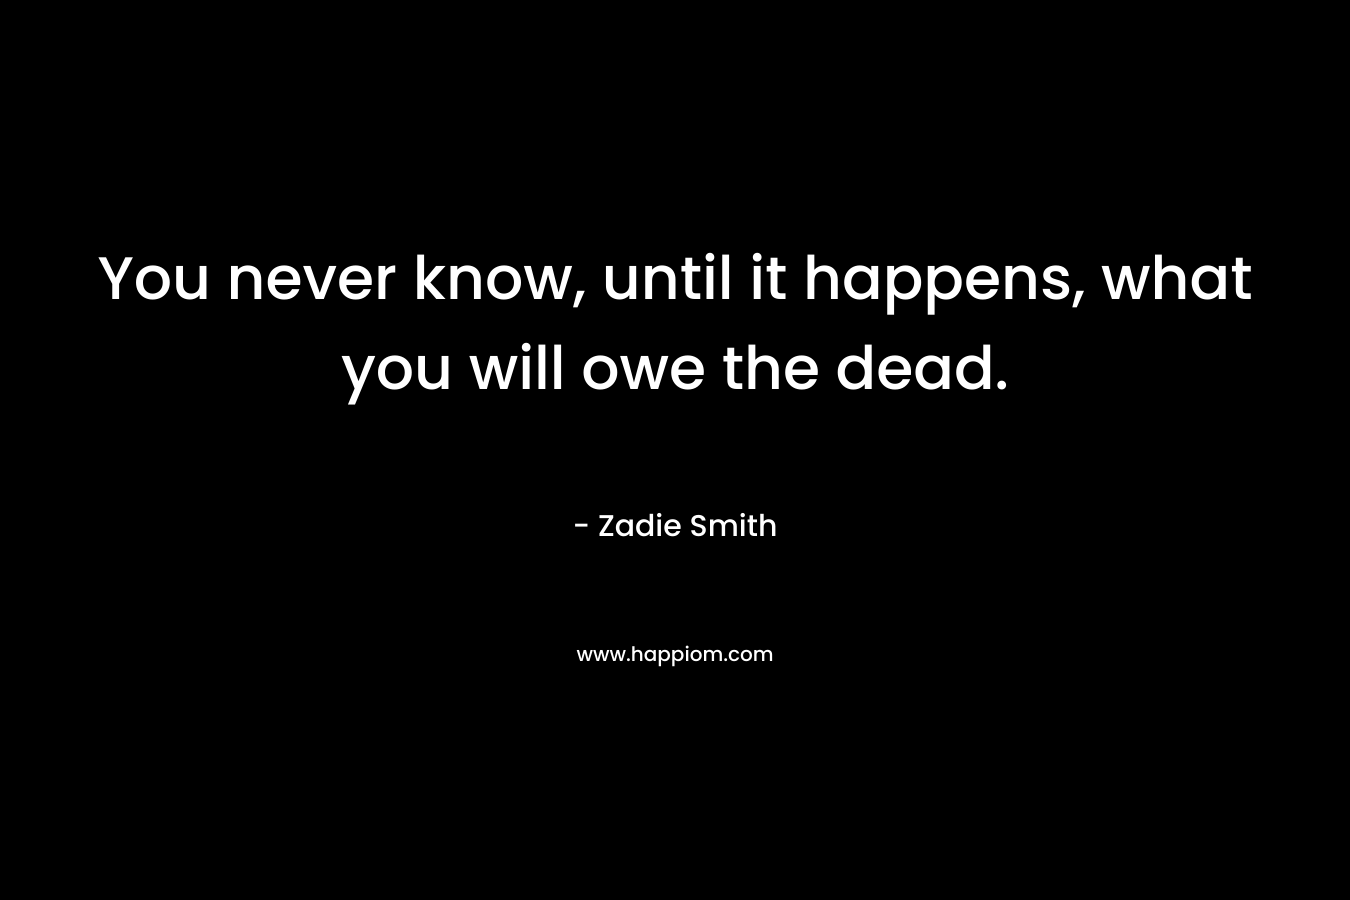 You never know, until it happens, what you will owe the dead. – Zadie Smith